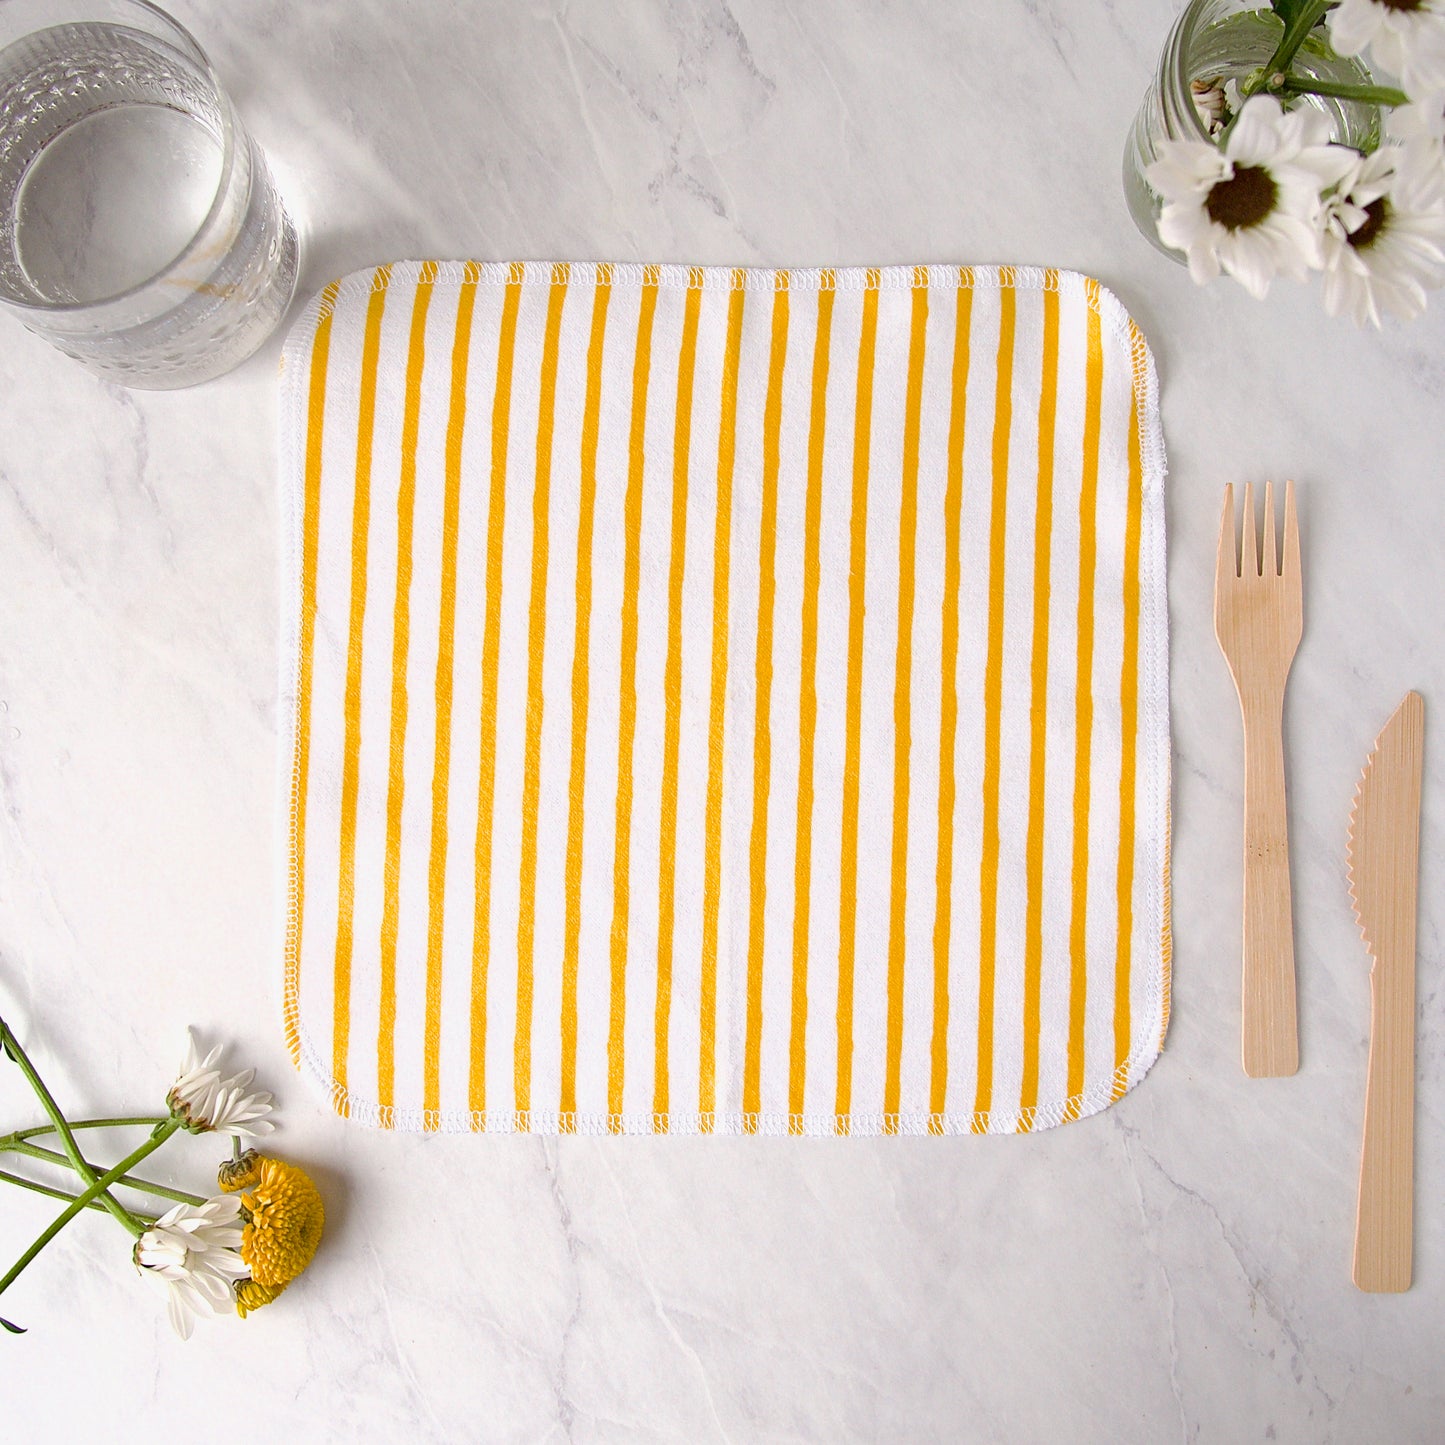 Reusable Cloth Napkins in Yellow and White Stripes